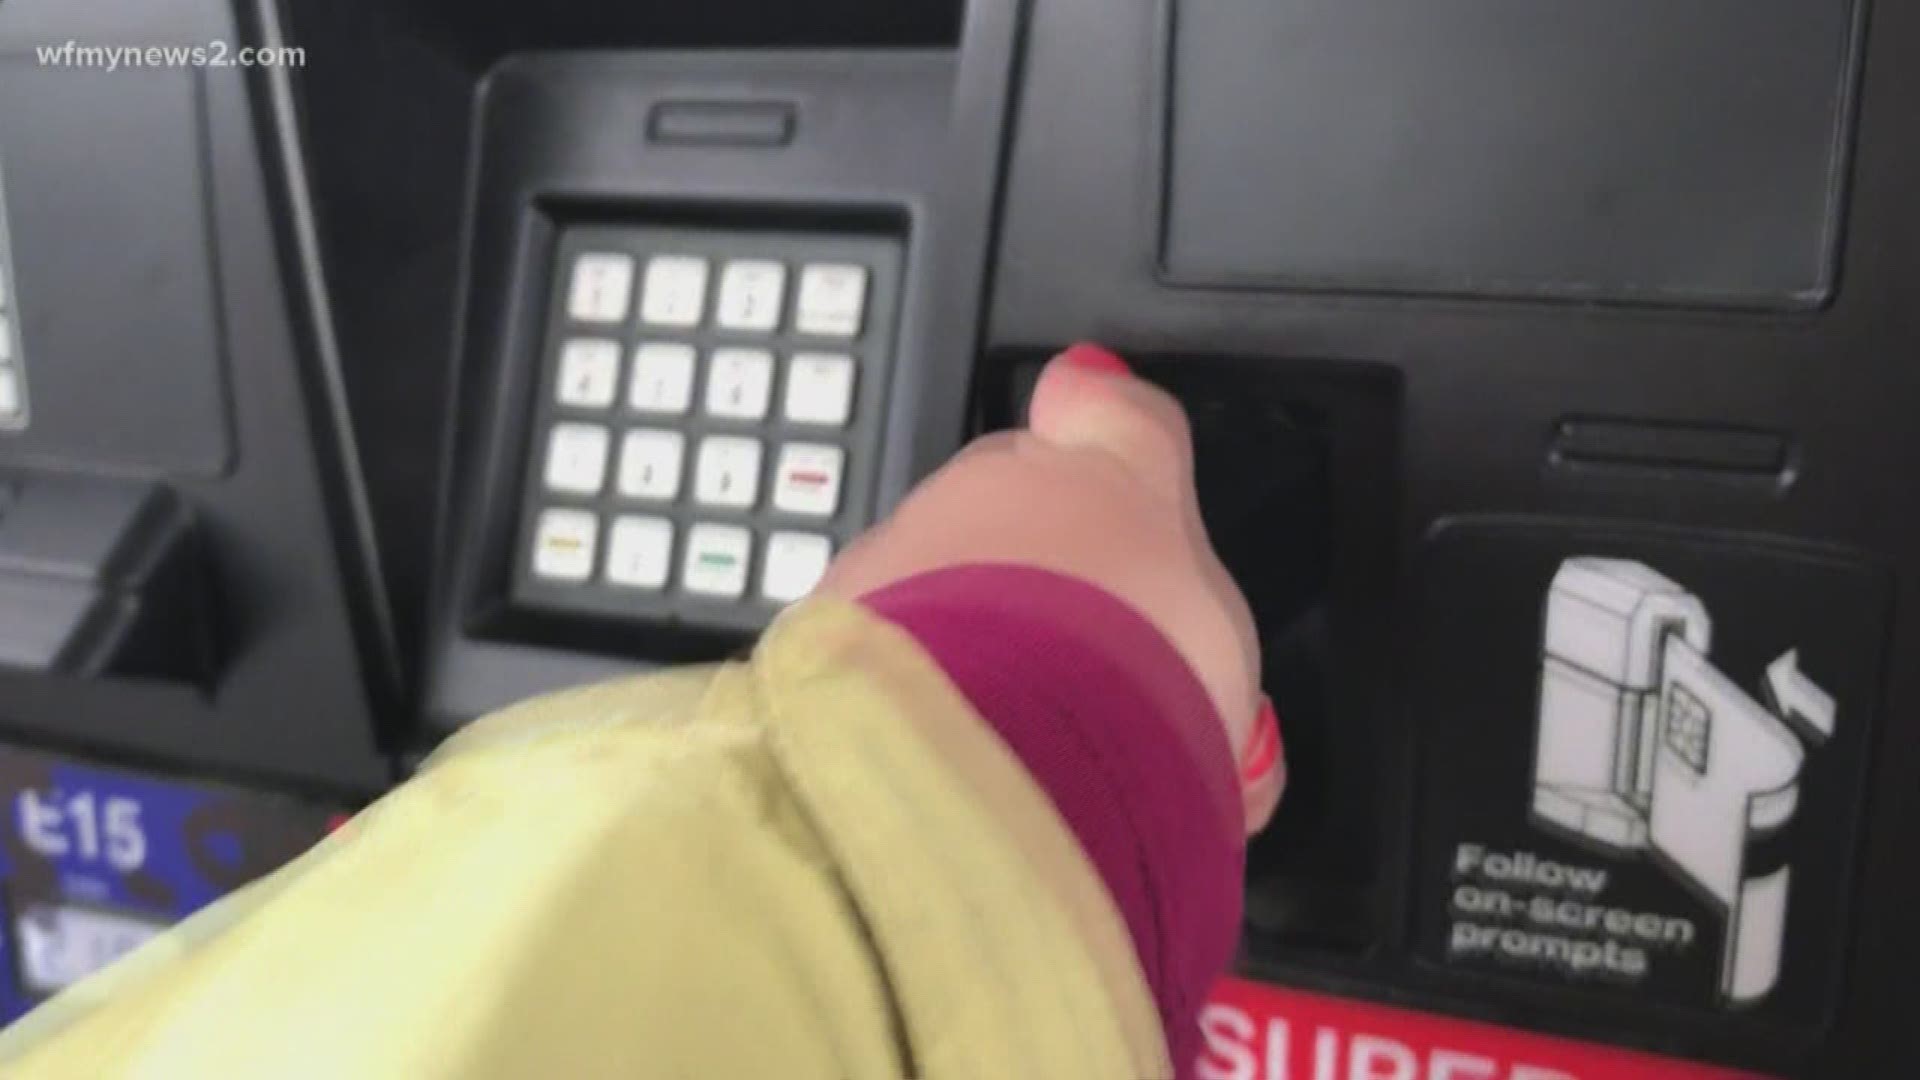 A viral post online says if you use the wrong pin number at the gas pump and the transaction still goes through, then you know a skimmer is on the pump. Our Verify team did some digging to see if this claim is true or not.